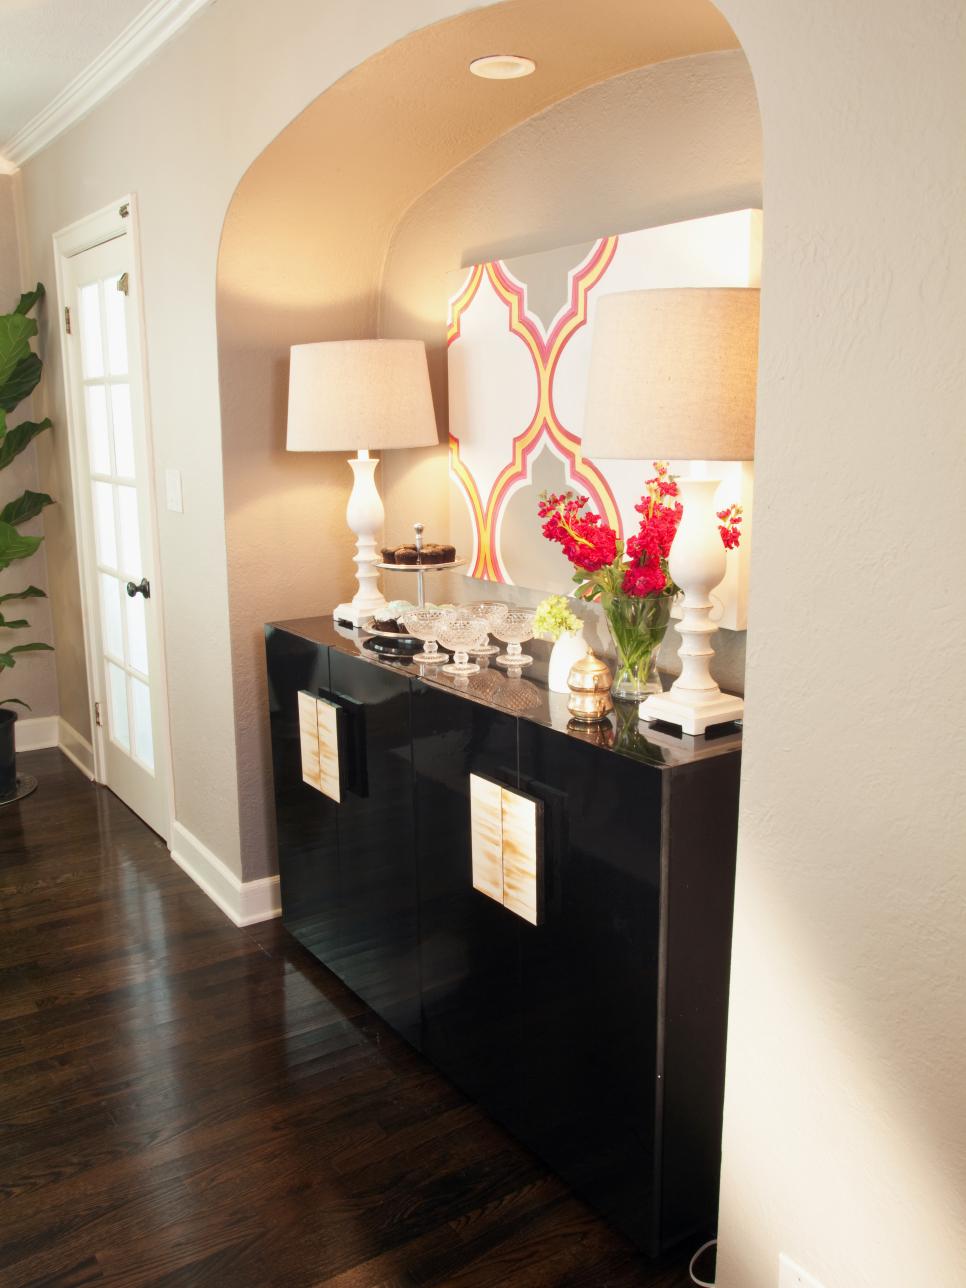 Dining Room Black High-Gloss Sideboard With White Lamps in Alcove